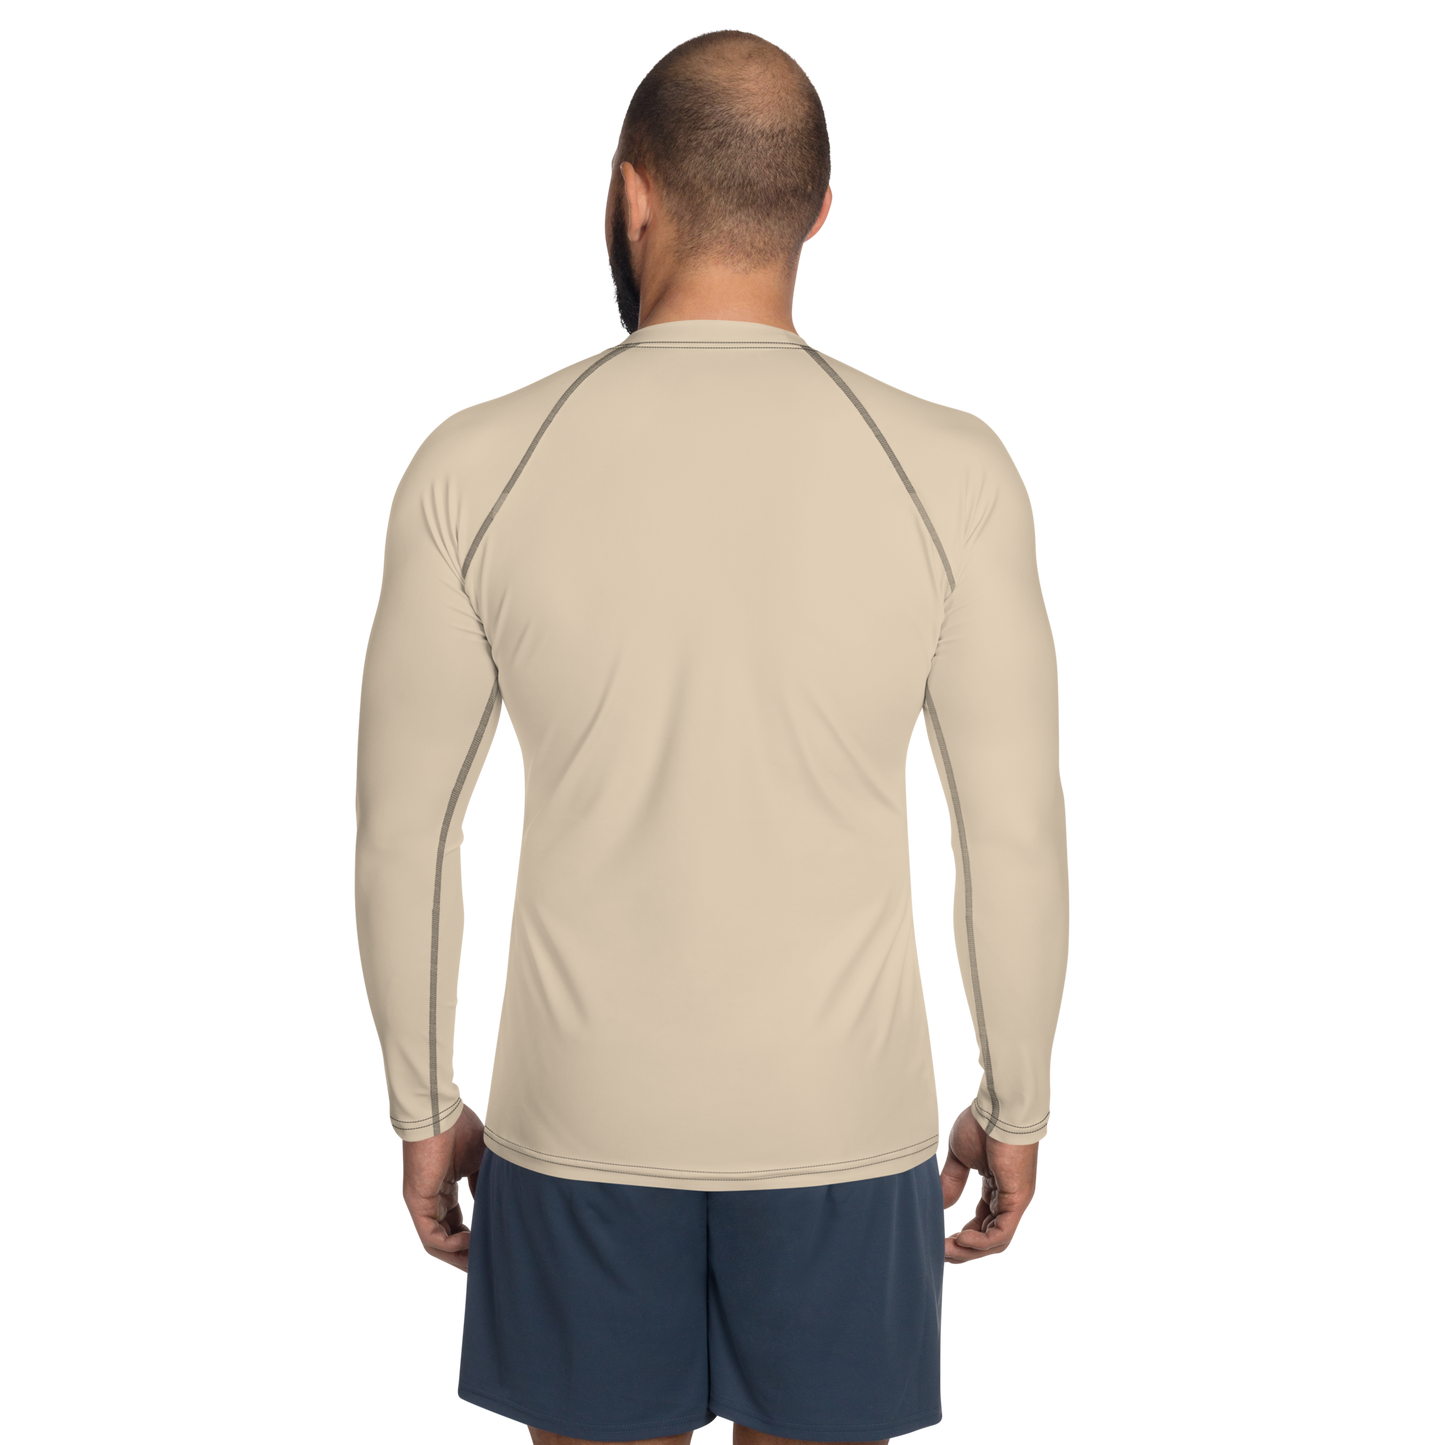 Long sleeve compression